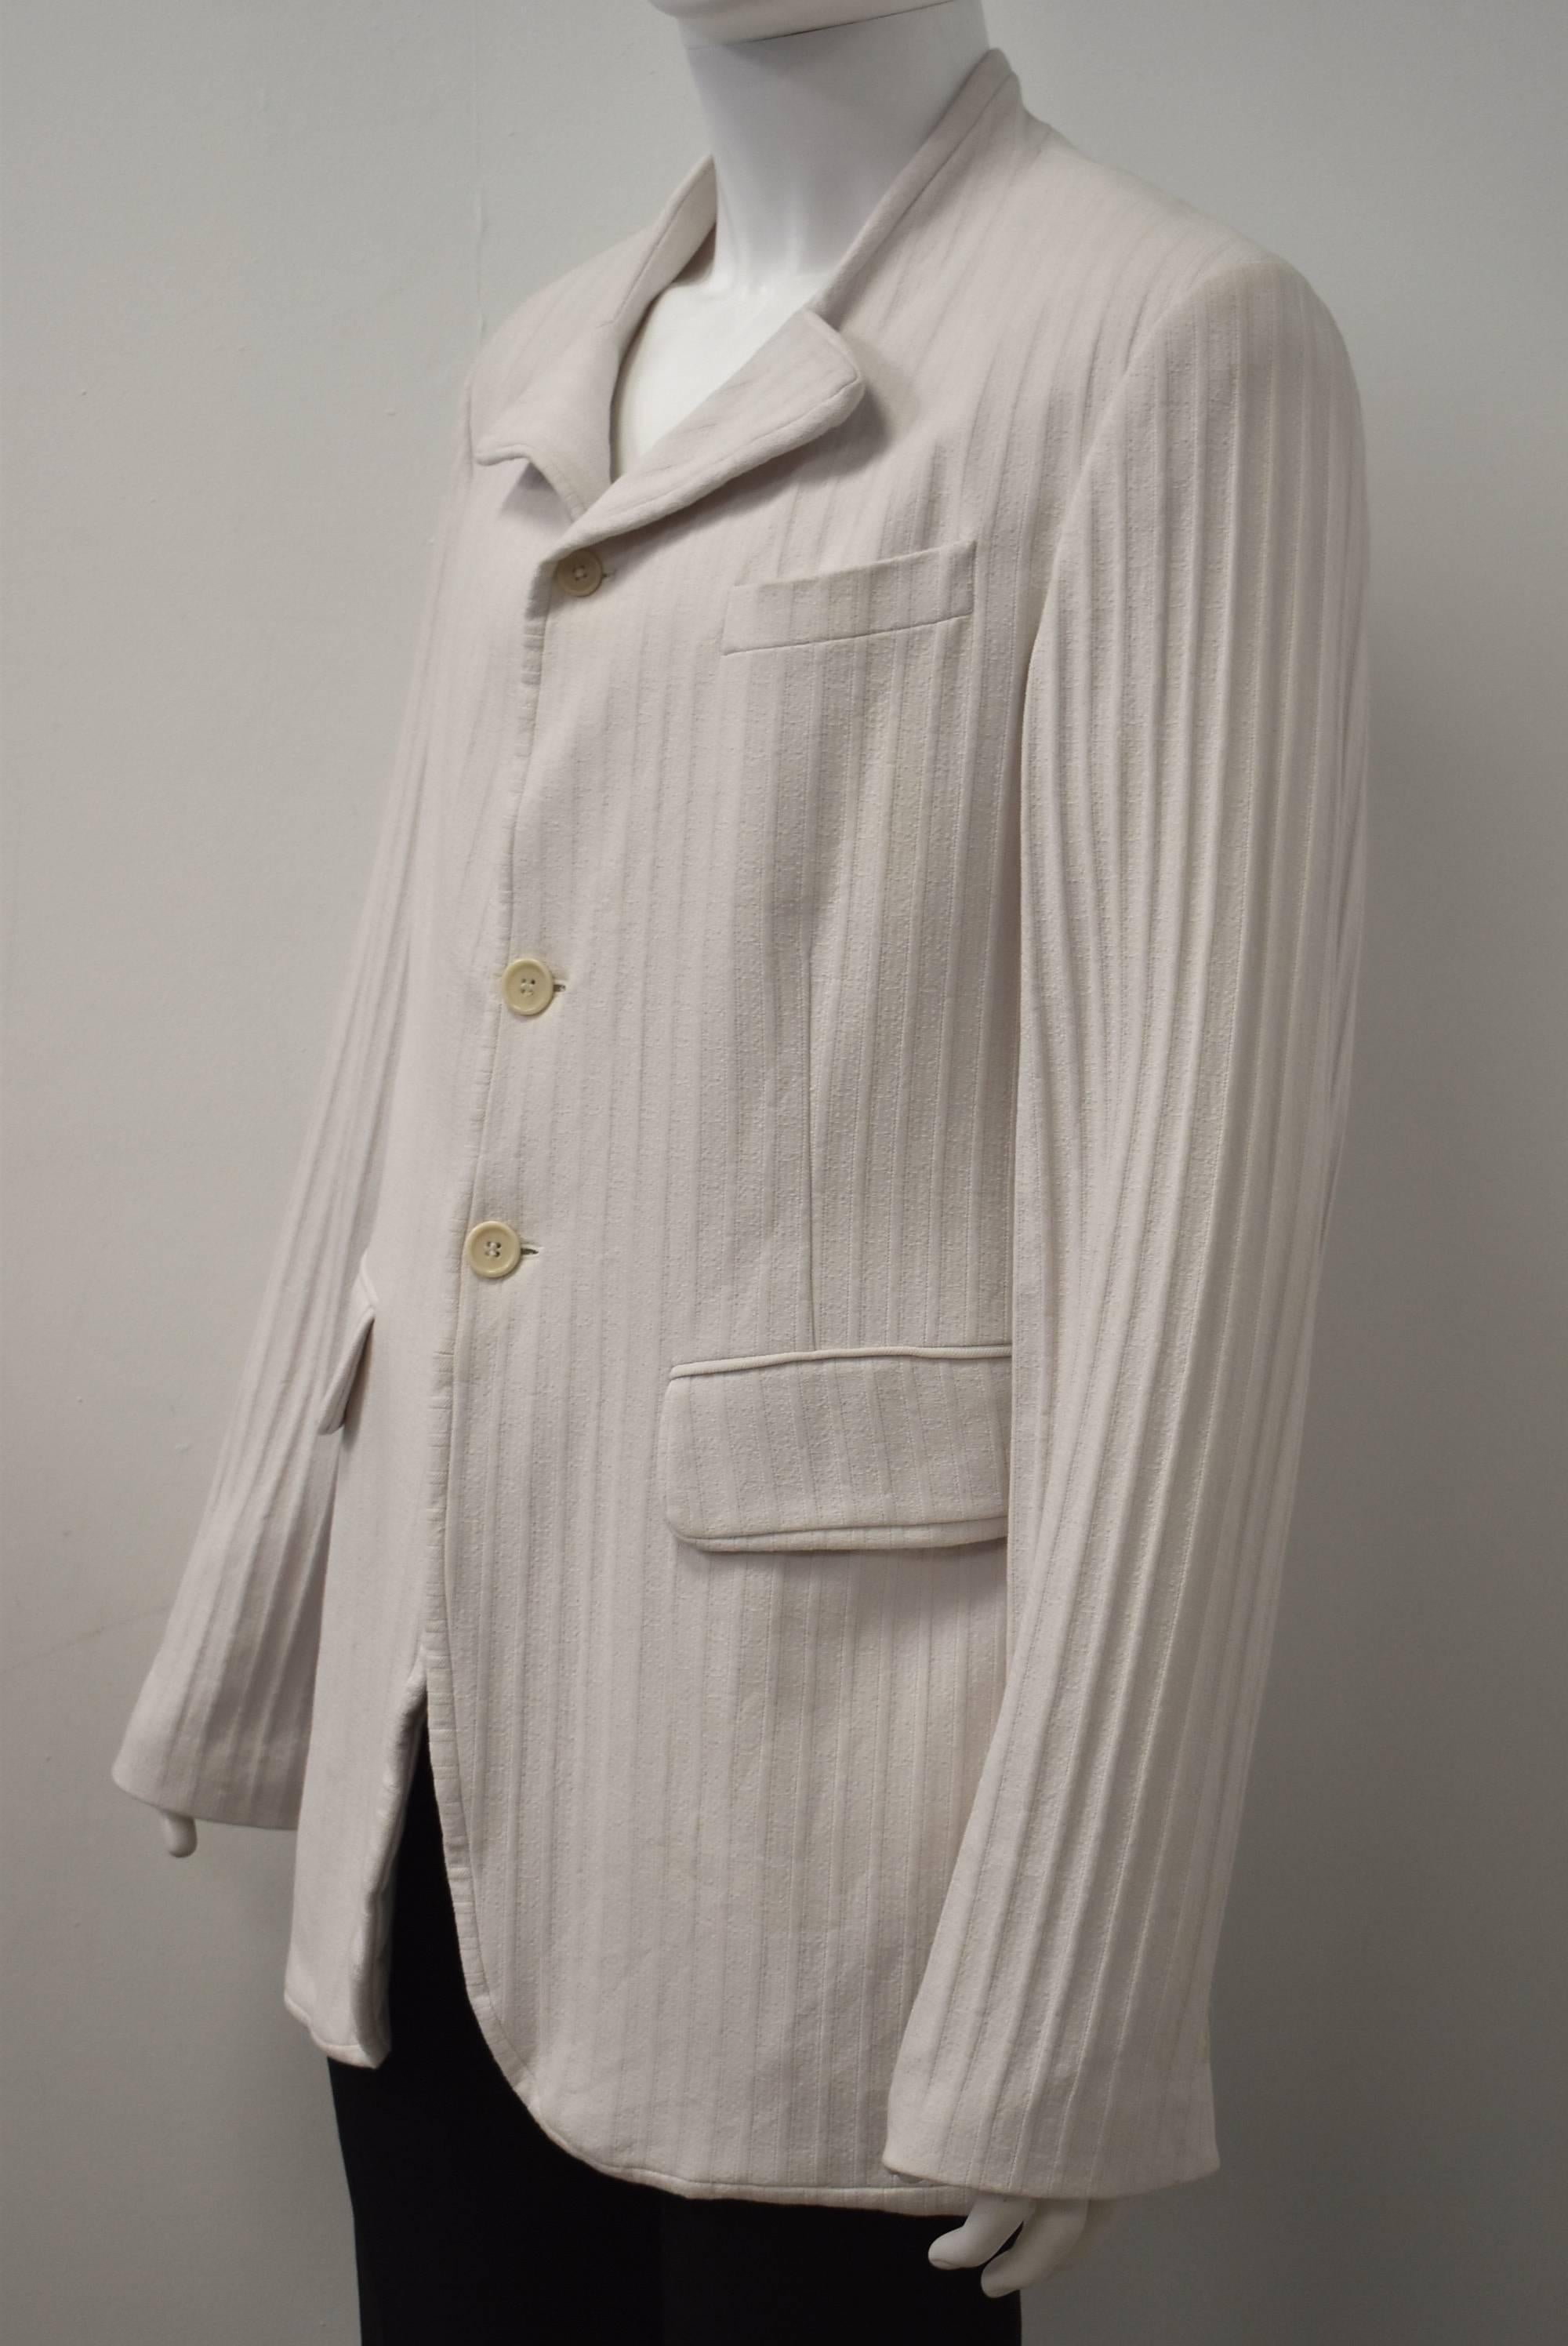 An interesting white jacket by Ann Demeulemeester. The jacket is made from a thick Striped/Ribbed cotton fabric. The jacket has a regular straight cut with pockets at the hip and button fastening. There is an unusual collar detail where it is